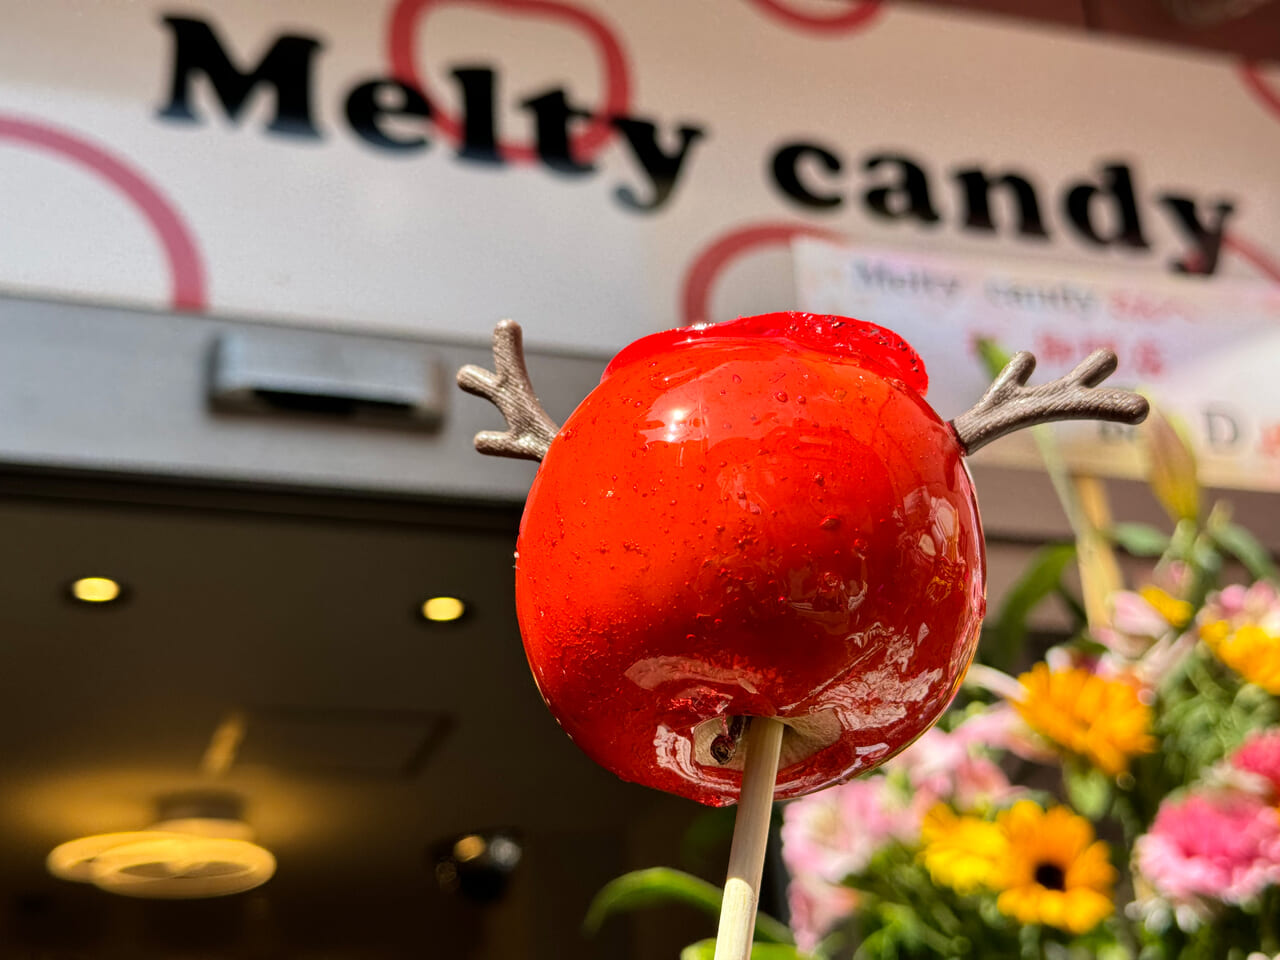 Melty candy